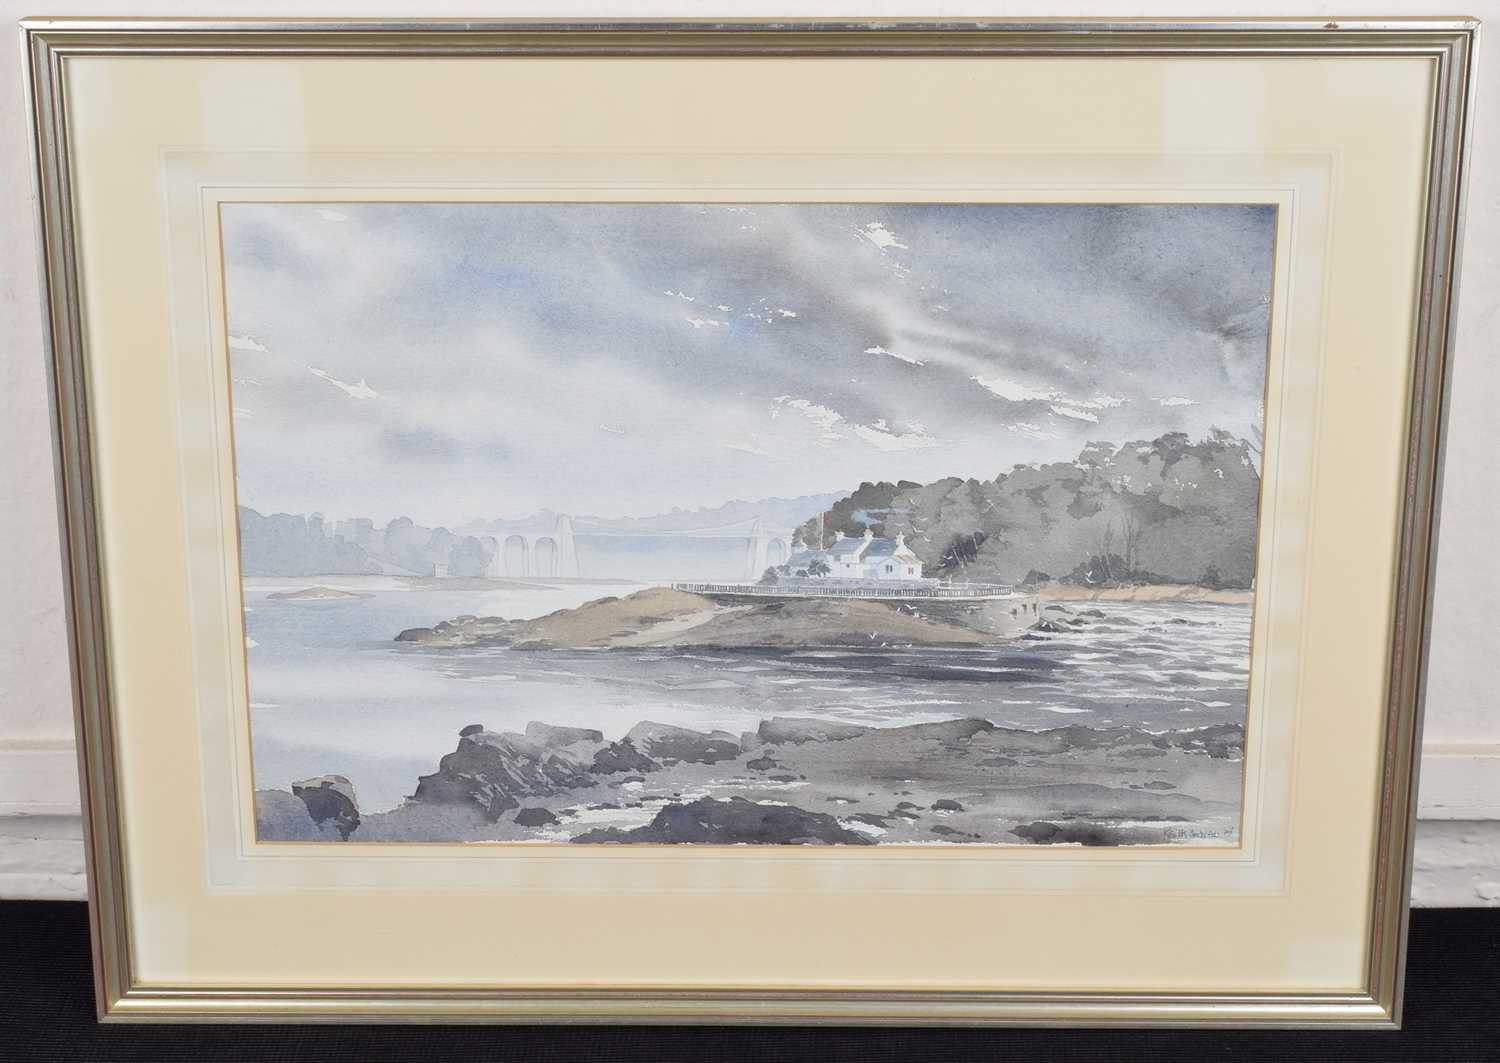 Keith Andrew R.C.A. (British 1947-) "Ynys Gored Goch in the Menai Strait", watercolour and pencil. - Image 2 of 2